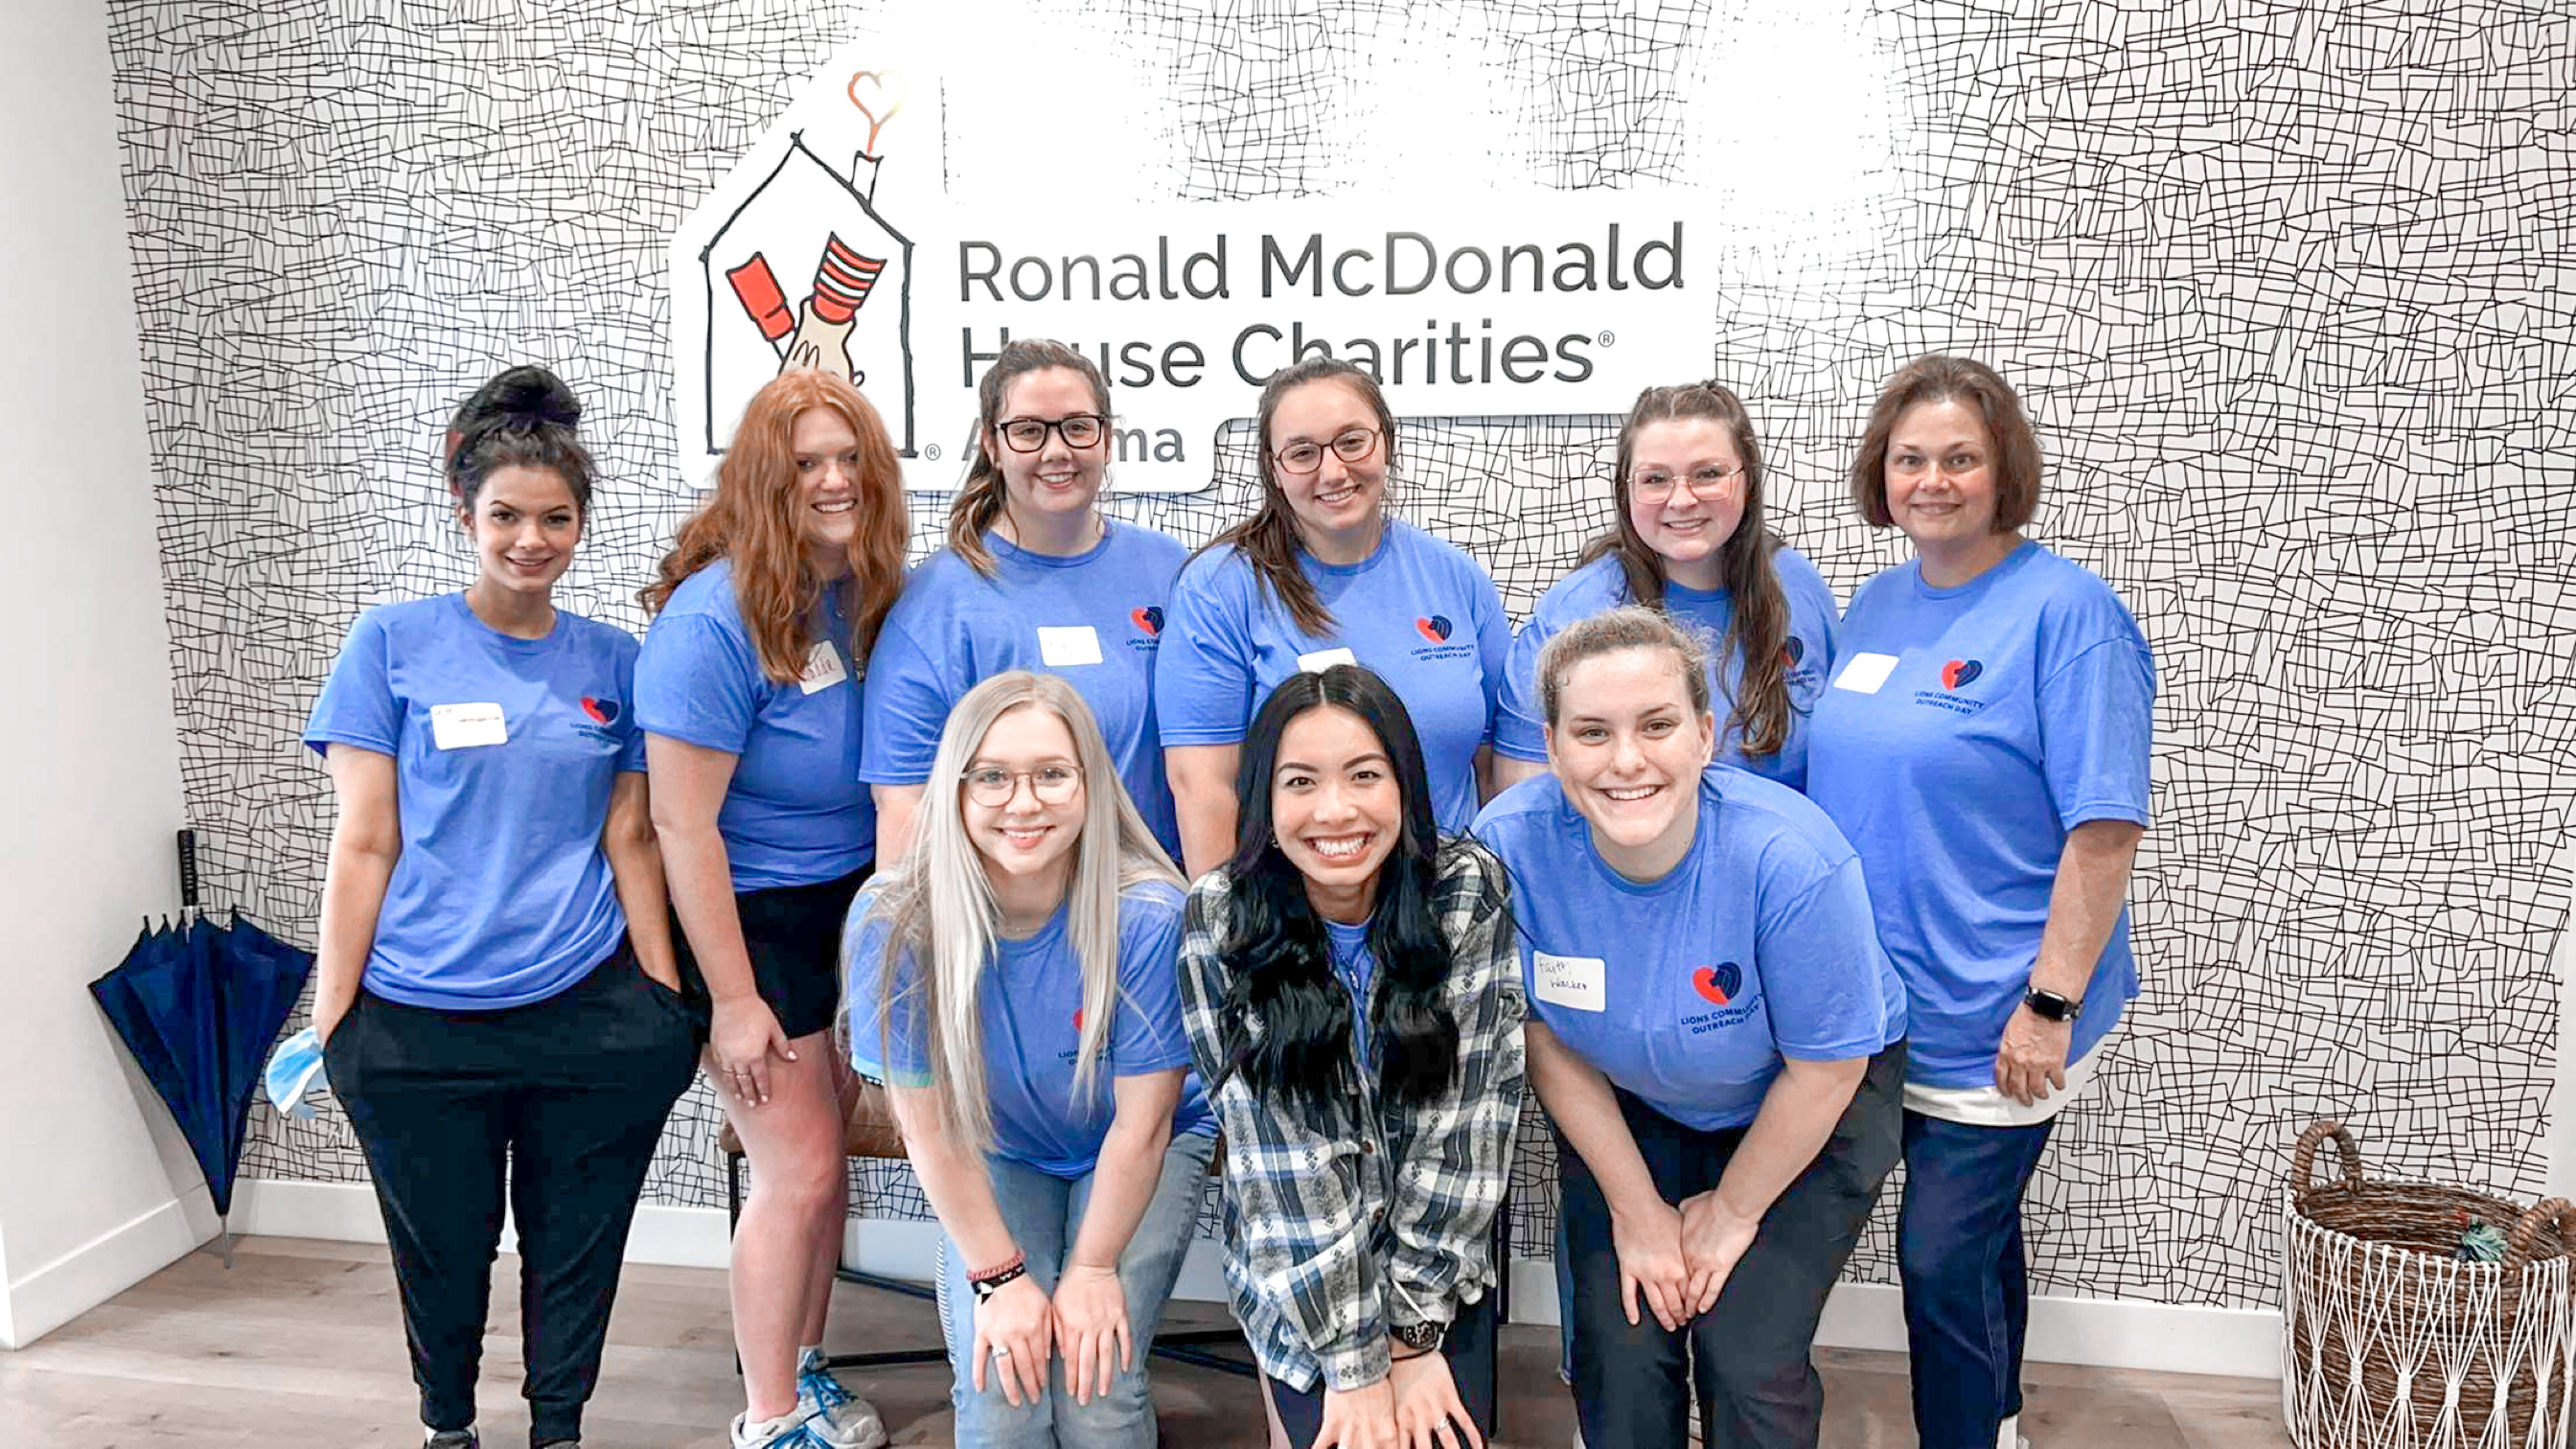 students pose in front of a Ronald McDonald House sign